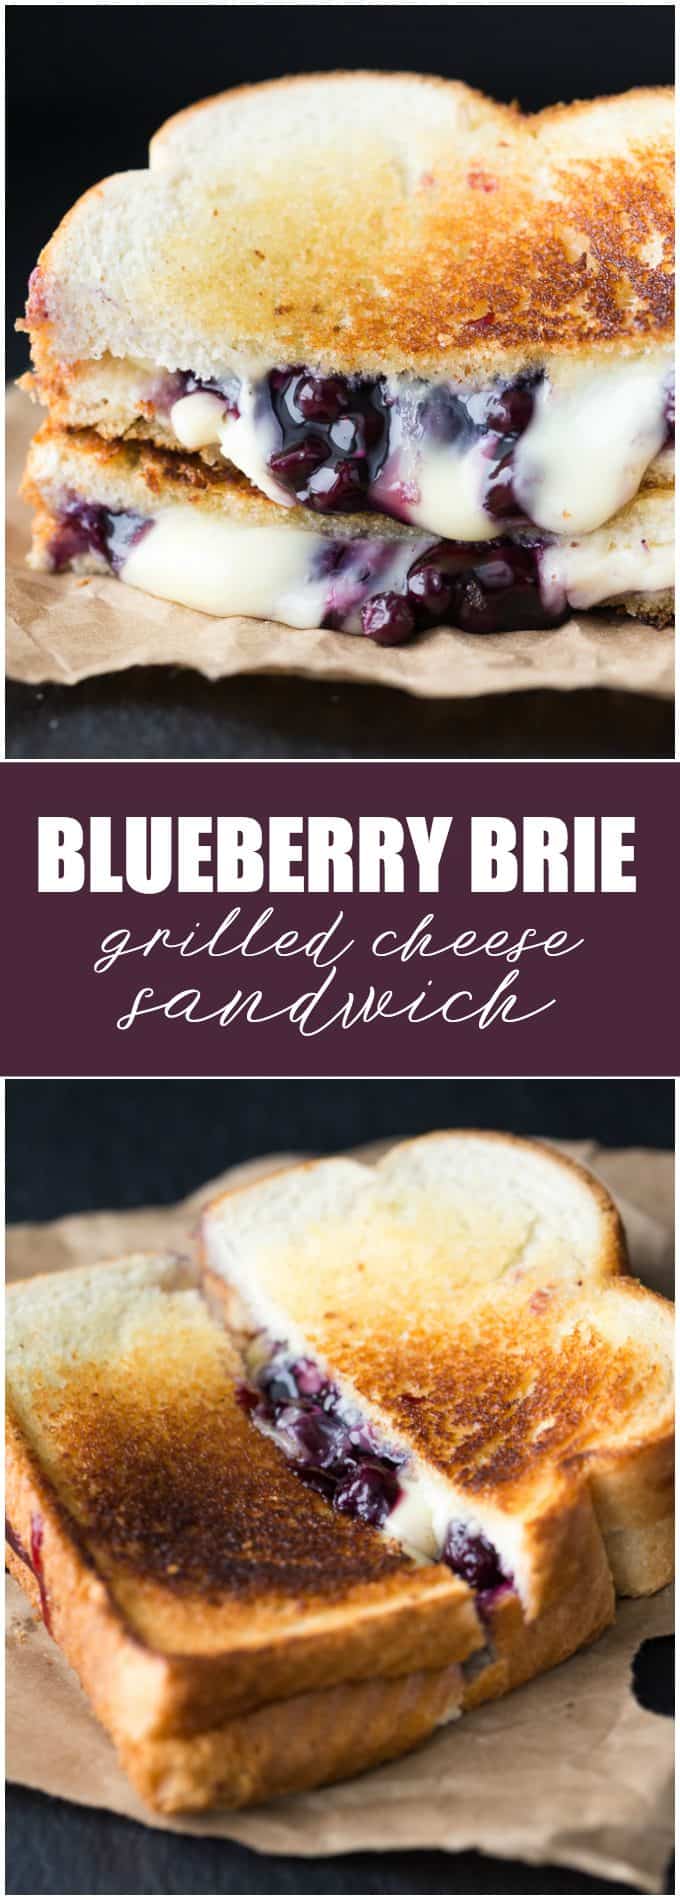 Blueberry Brie Grilled Cheese Sandwich - Yes, lunch can actually be a dessert! Enjoy the decadence. 